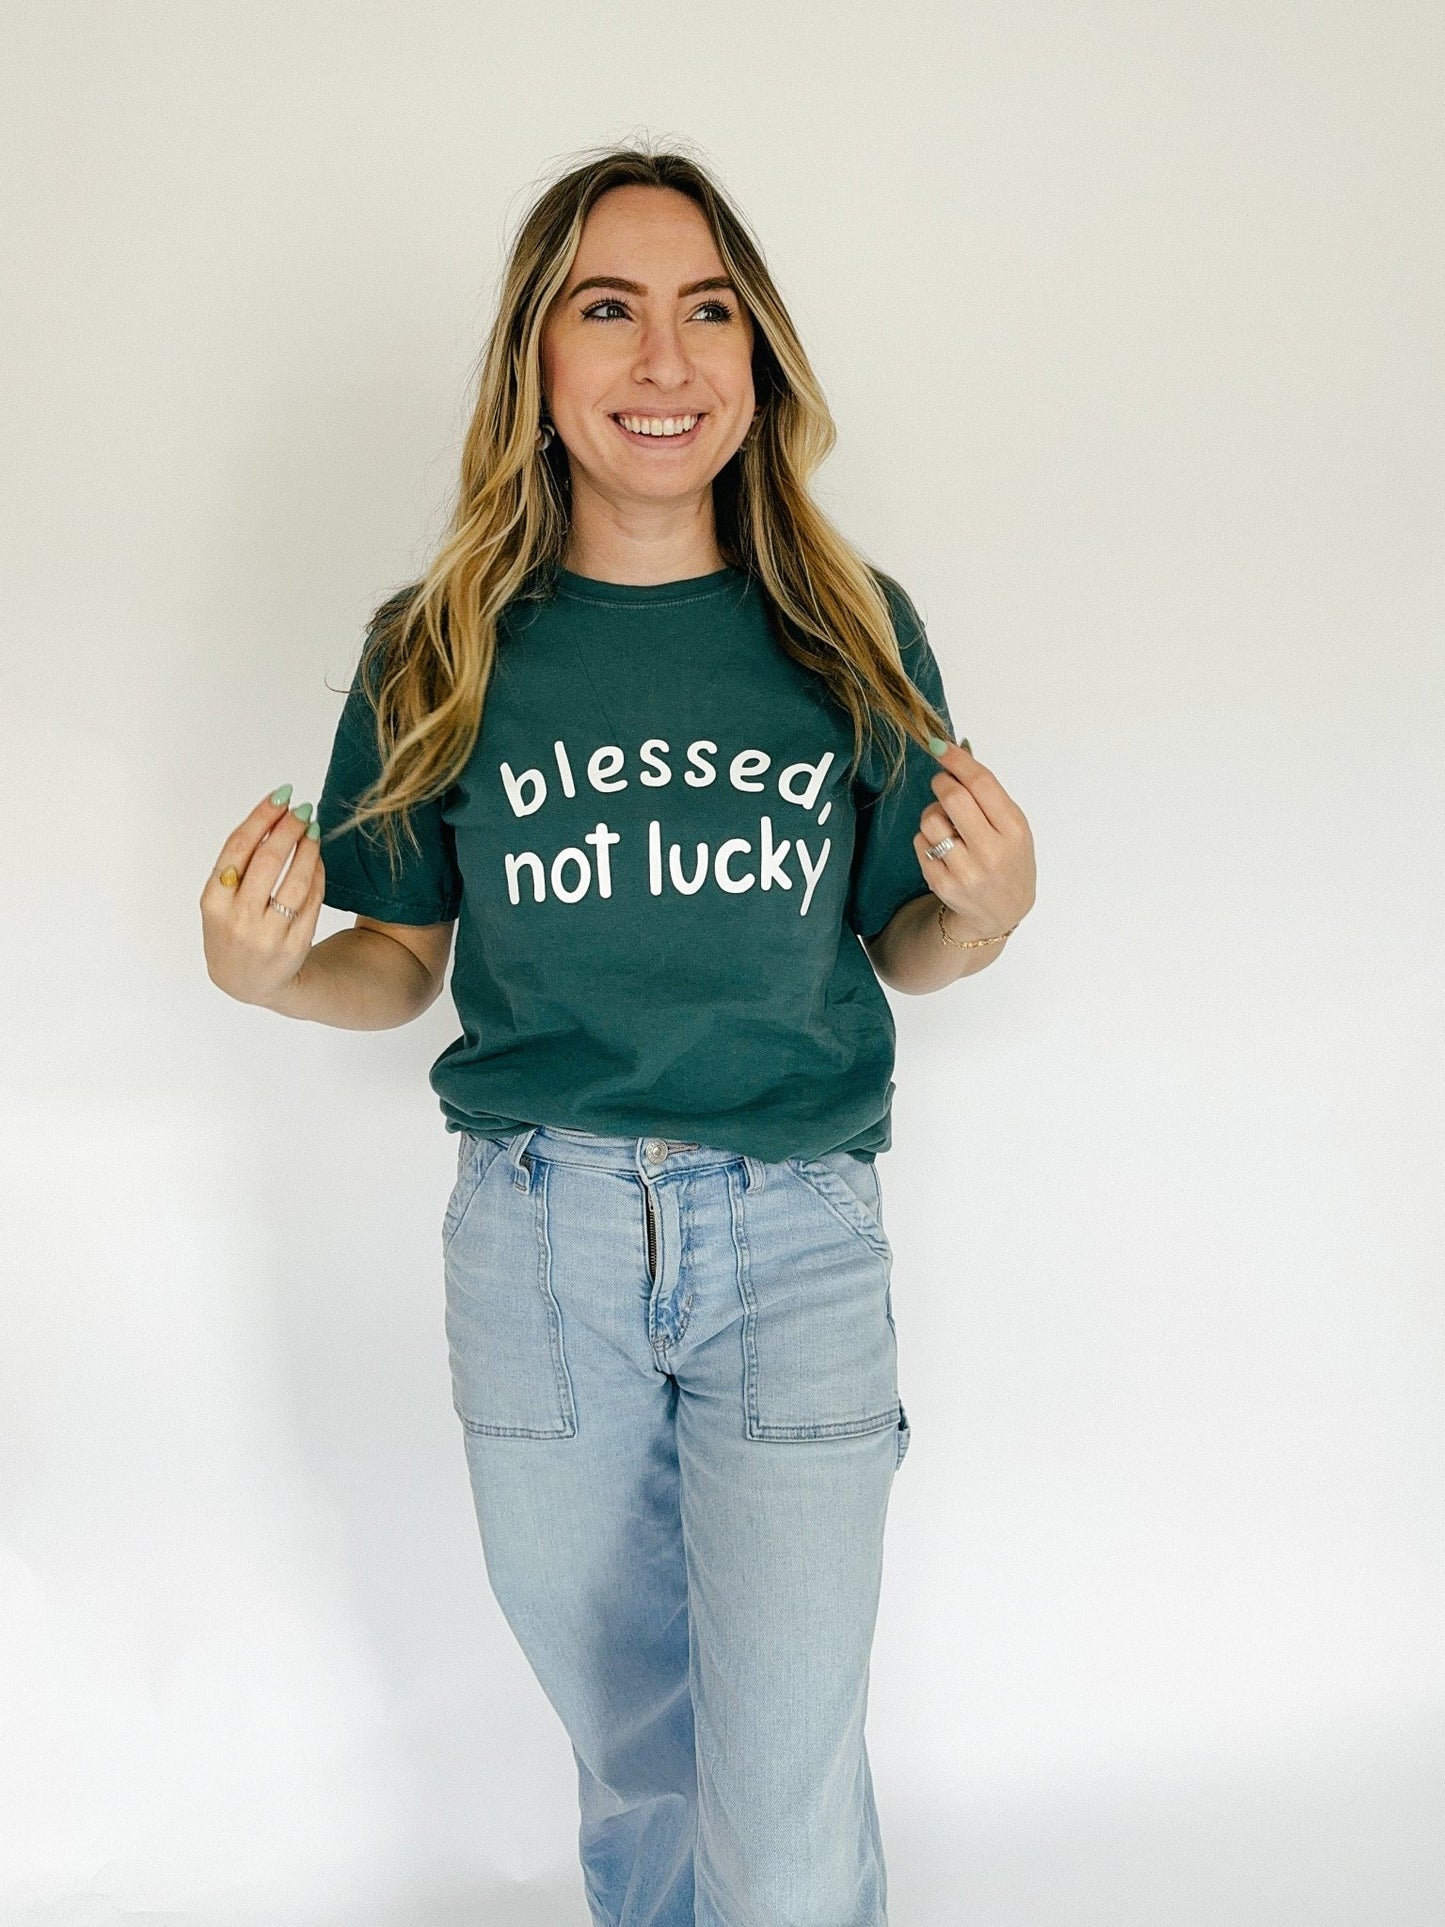 Blessed, Not Lucky Tee - The Dragonfly Boutique